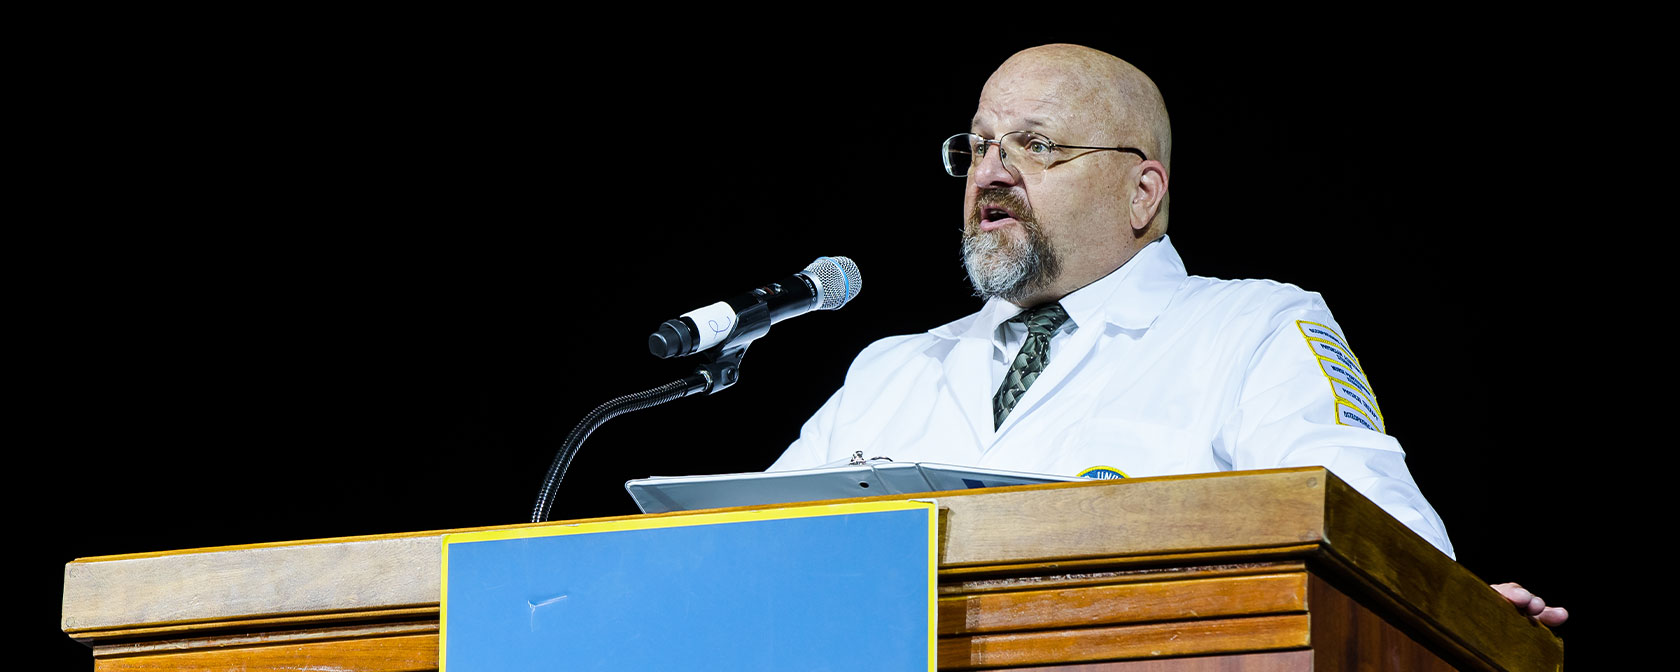 Dr. Andrew Priest speaks at the podium during a Touro Nevada white coat ceremony